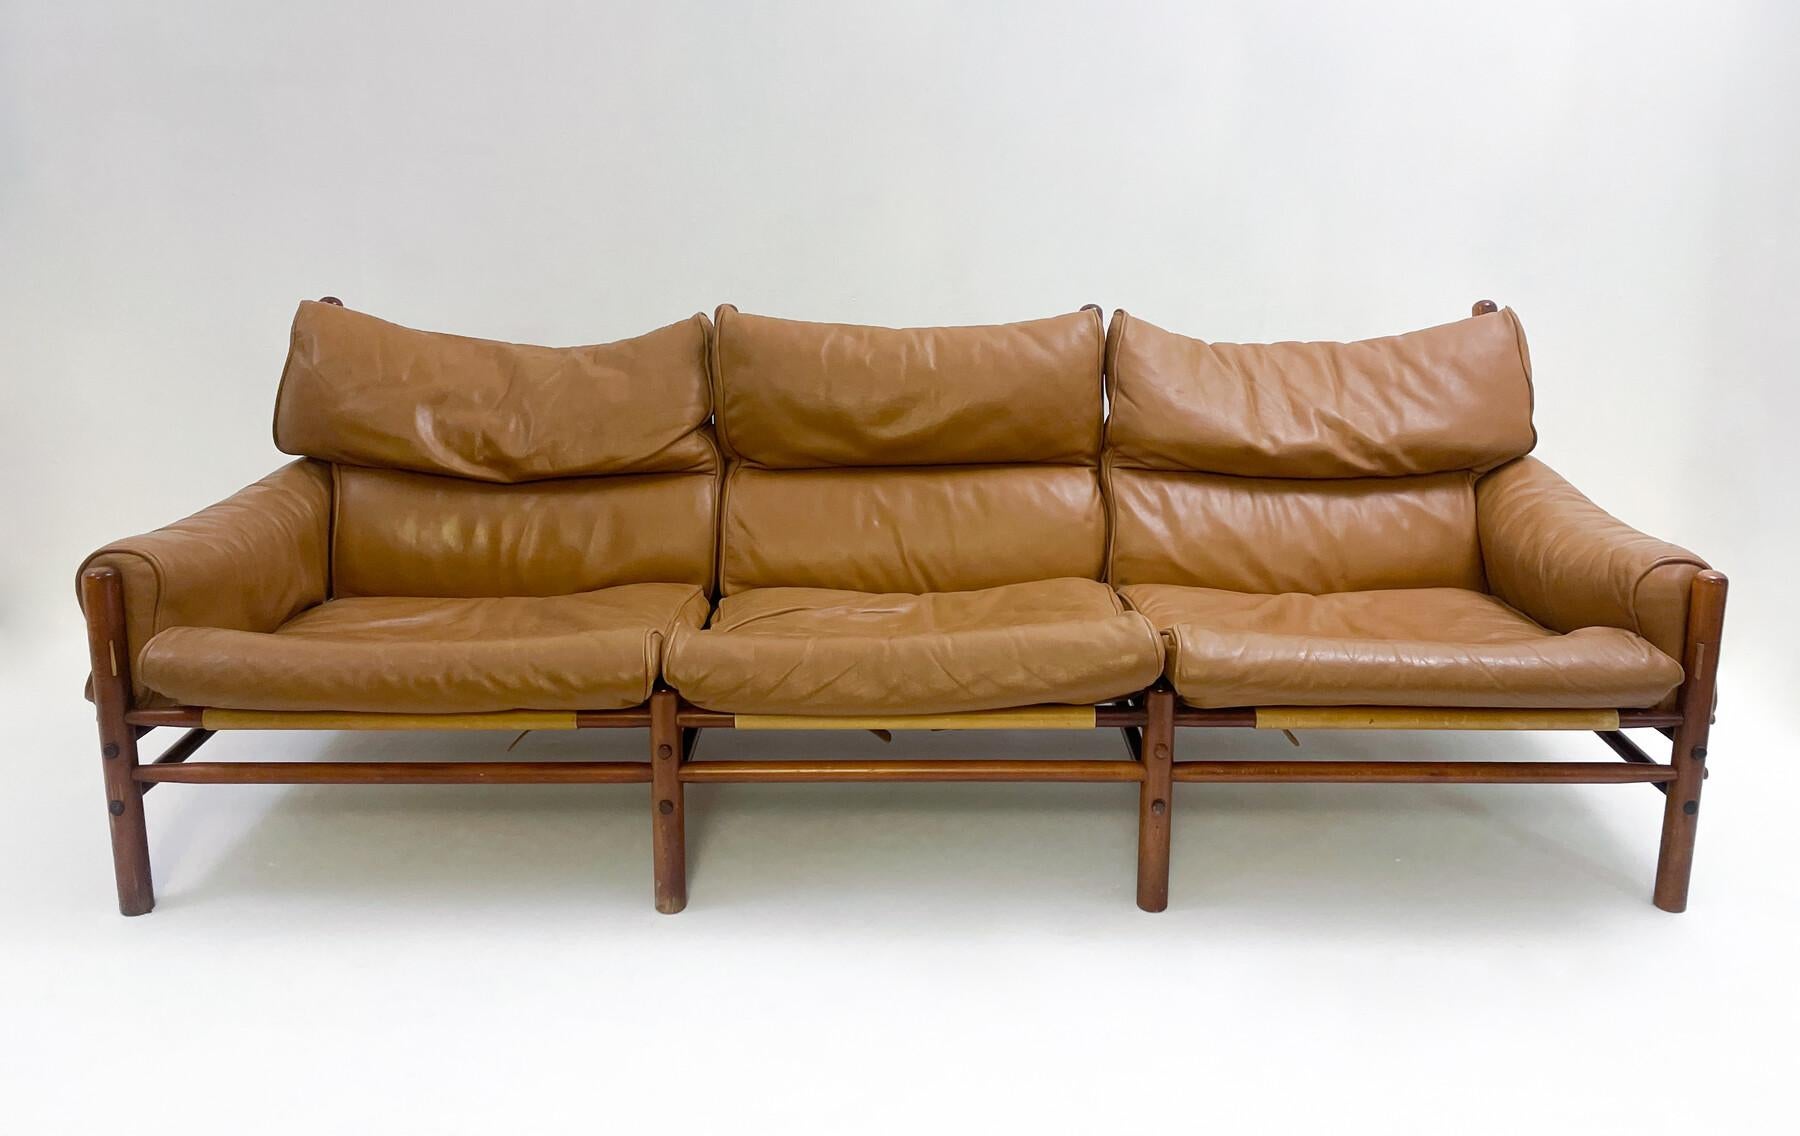 Leather Mid-Century Modern Kontiki Three-Seater Sofa by Arne Norell, Sweden, 1960s For Sale